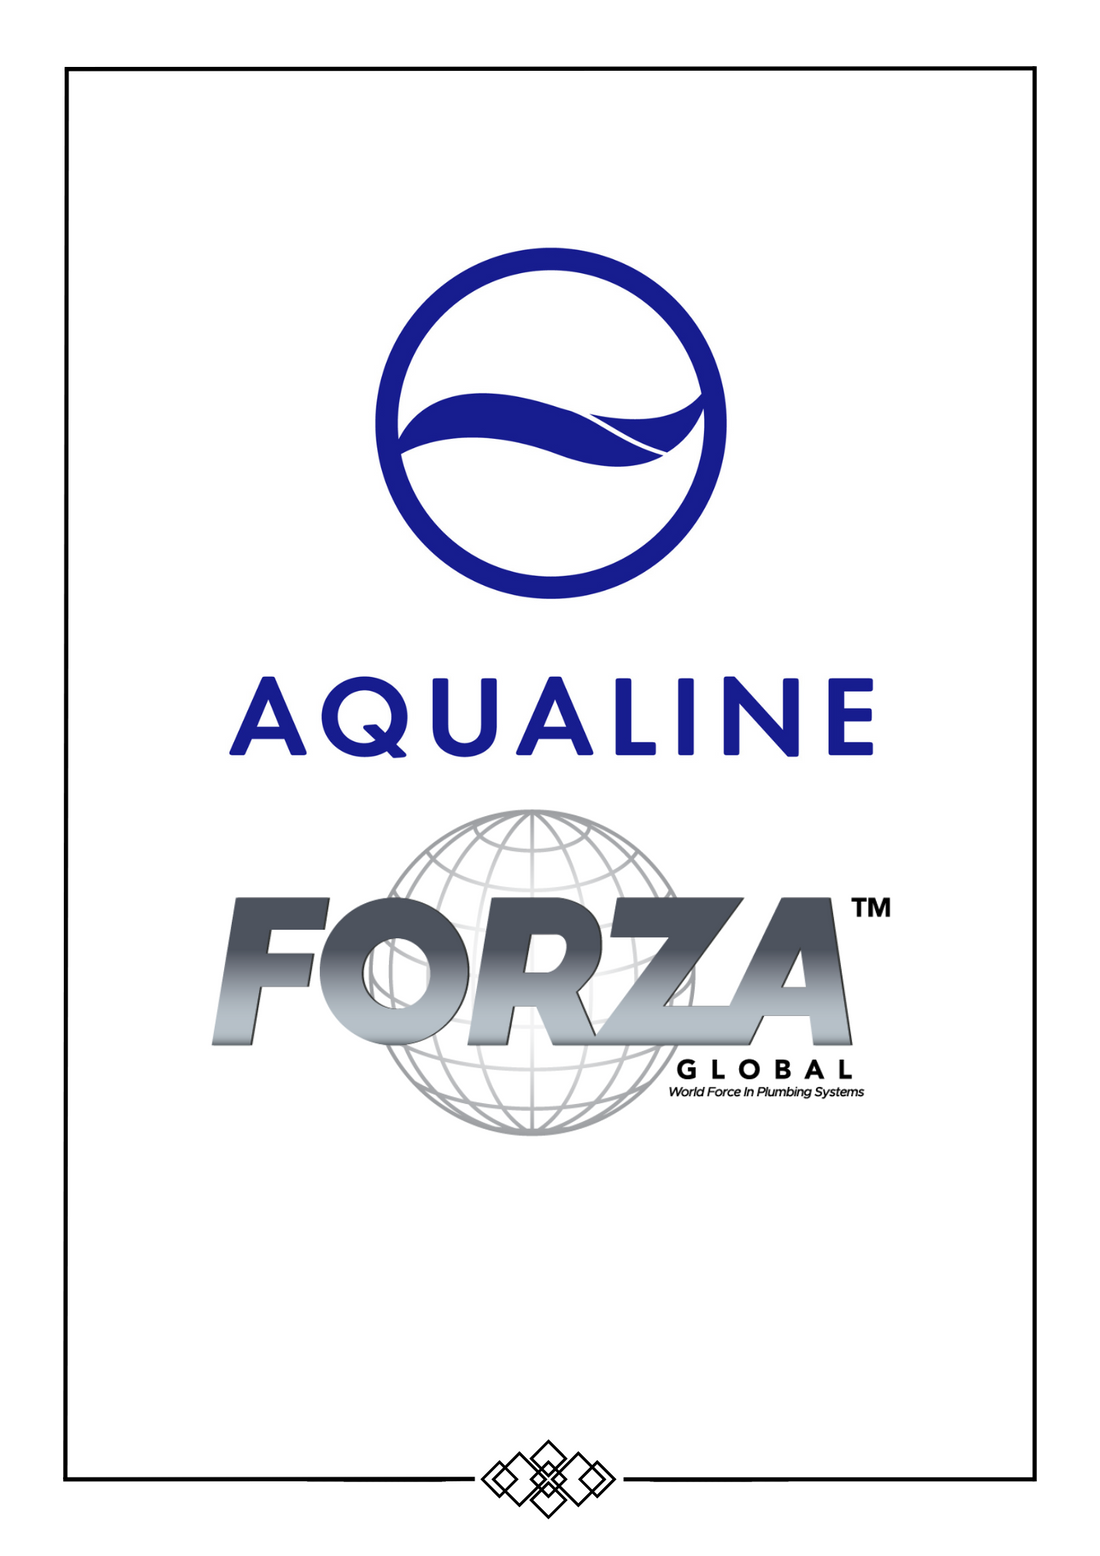 Aqualine announces acquisition of Forza Global NZ agency